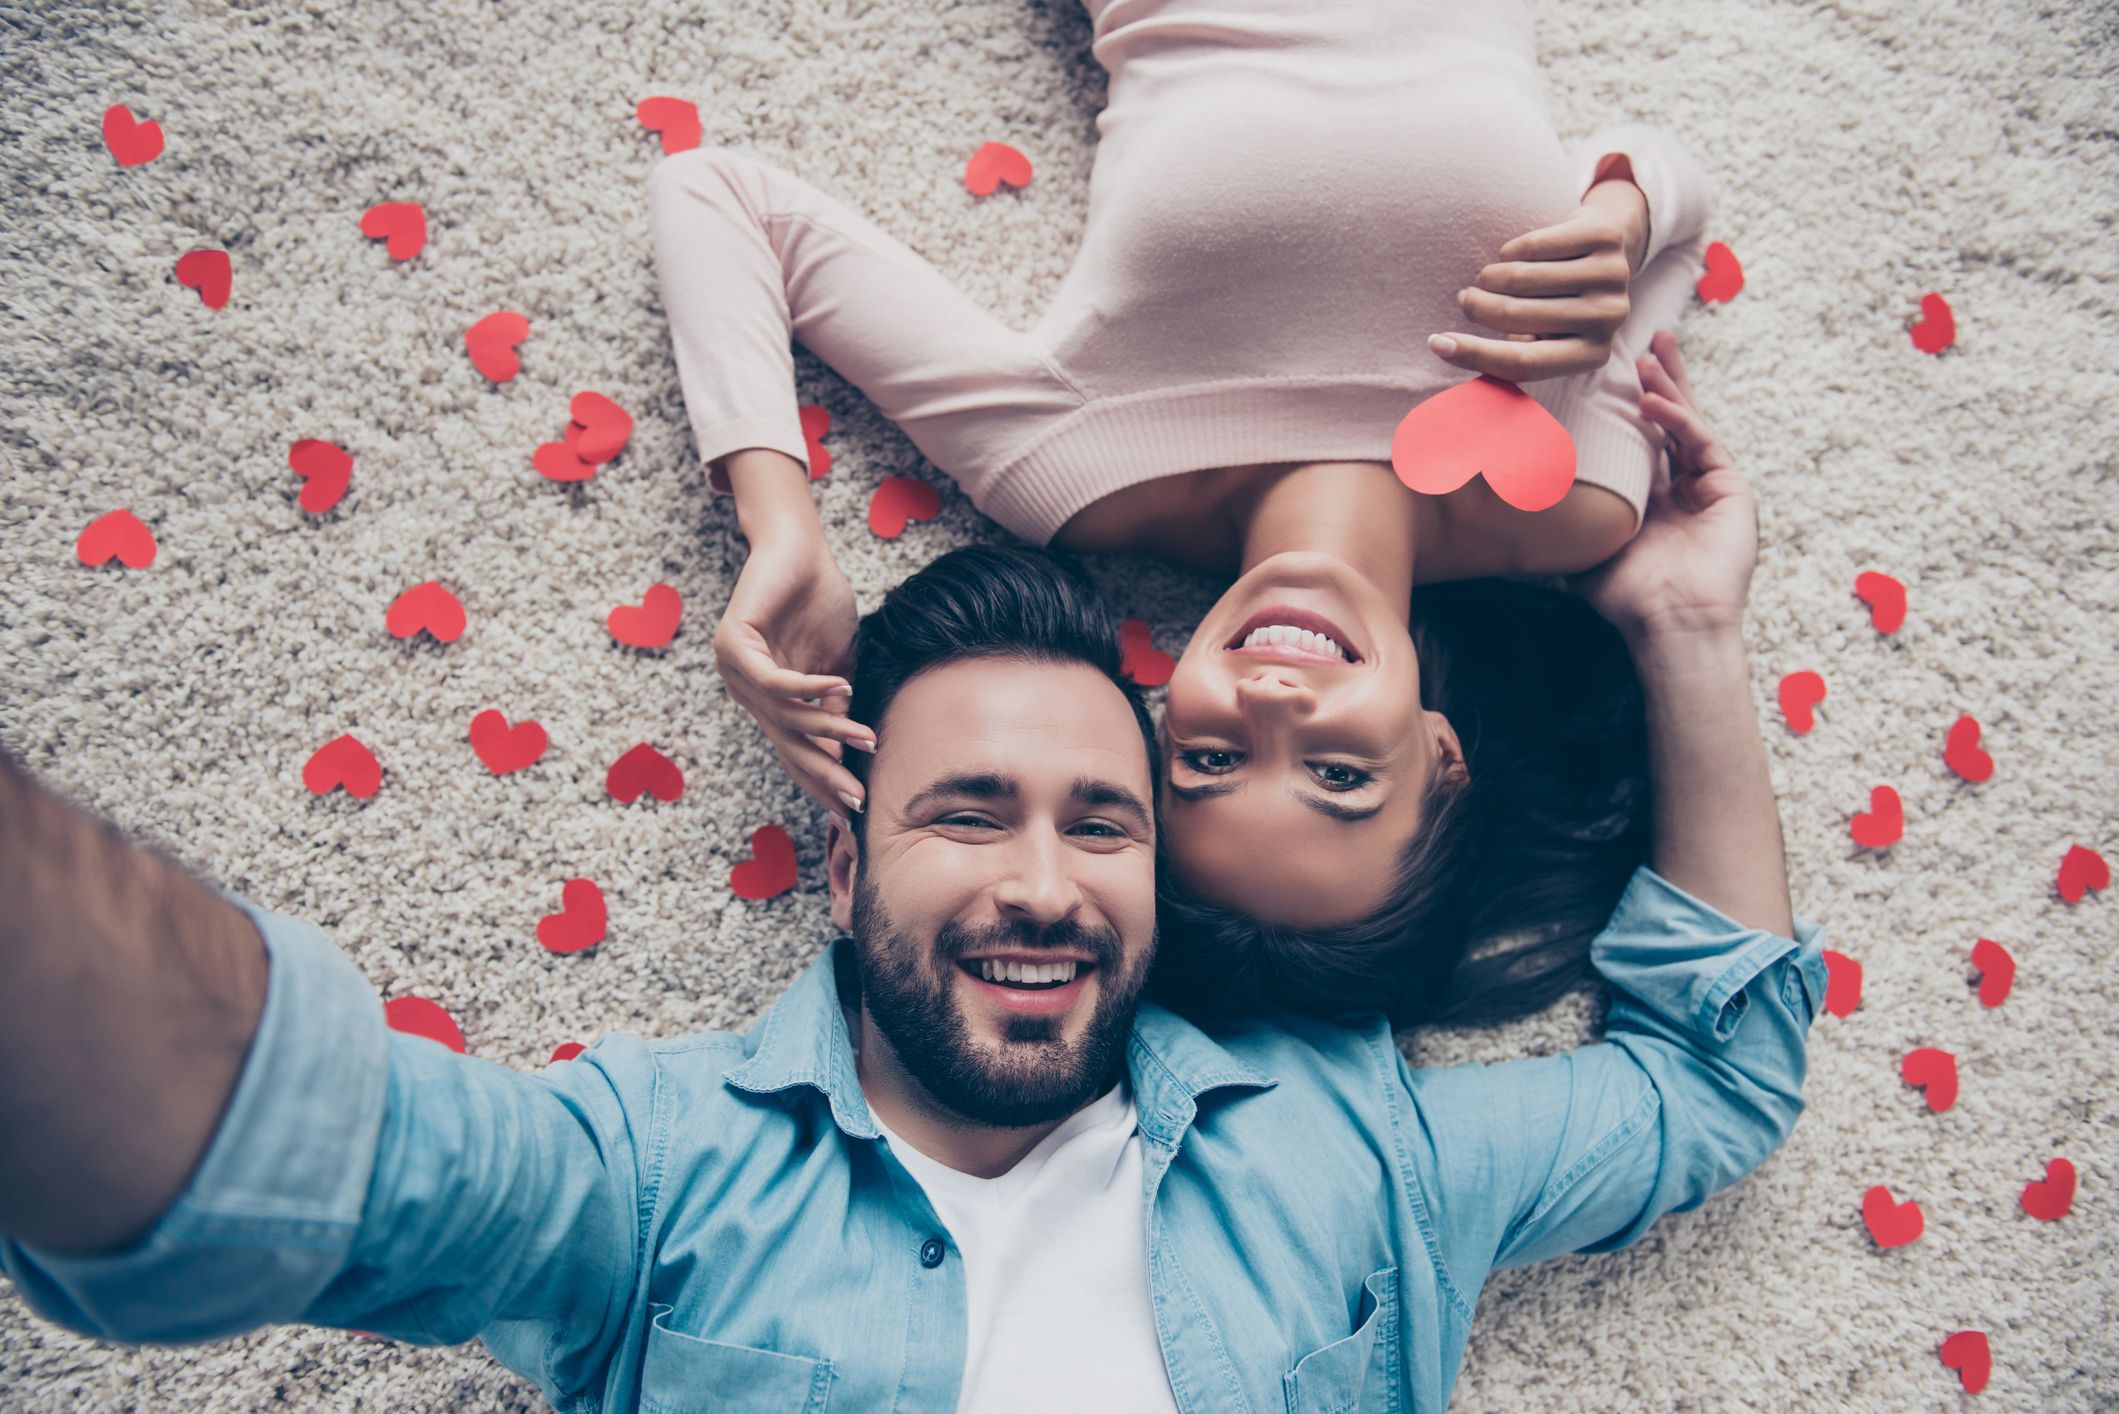 Close Up Photo Couple she Her he Him His Lady Guy Telephone Smart Phone  Hands Arms Make Take Selfies Romantic Date Wear Stock Image - Image of  photographing, leisure: 142406287